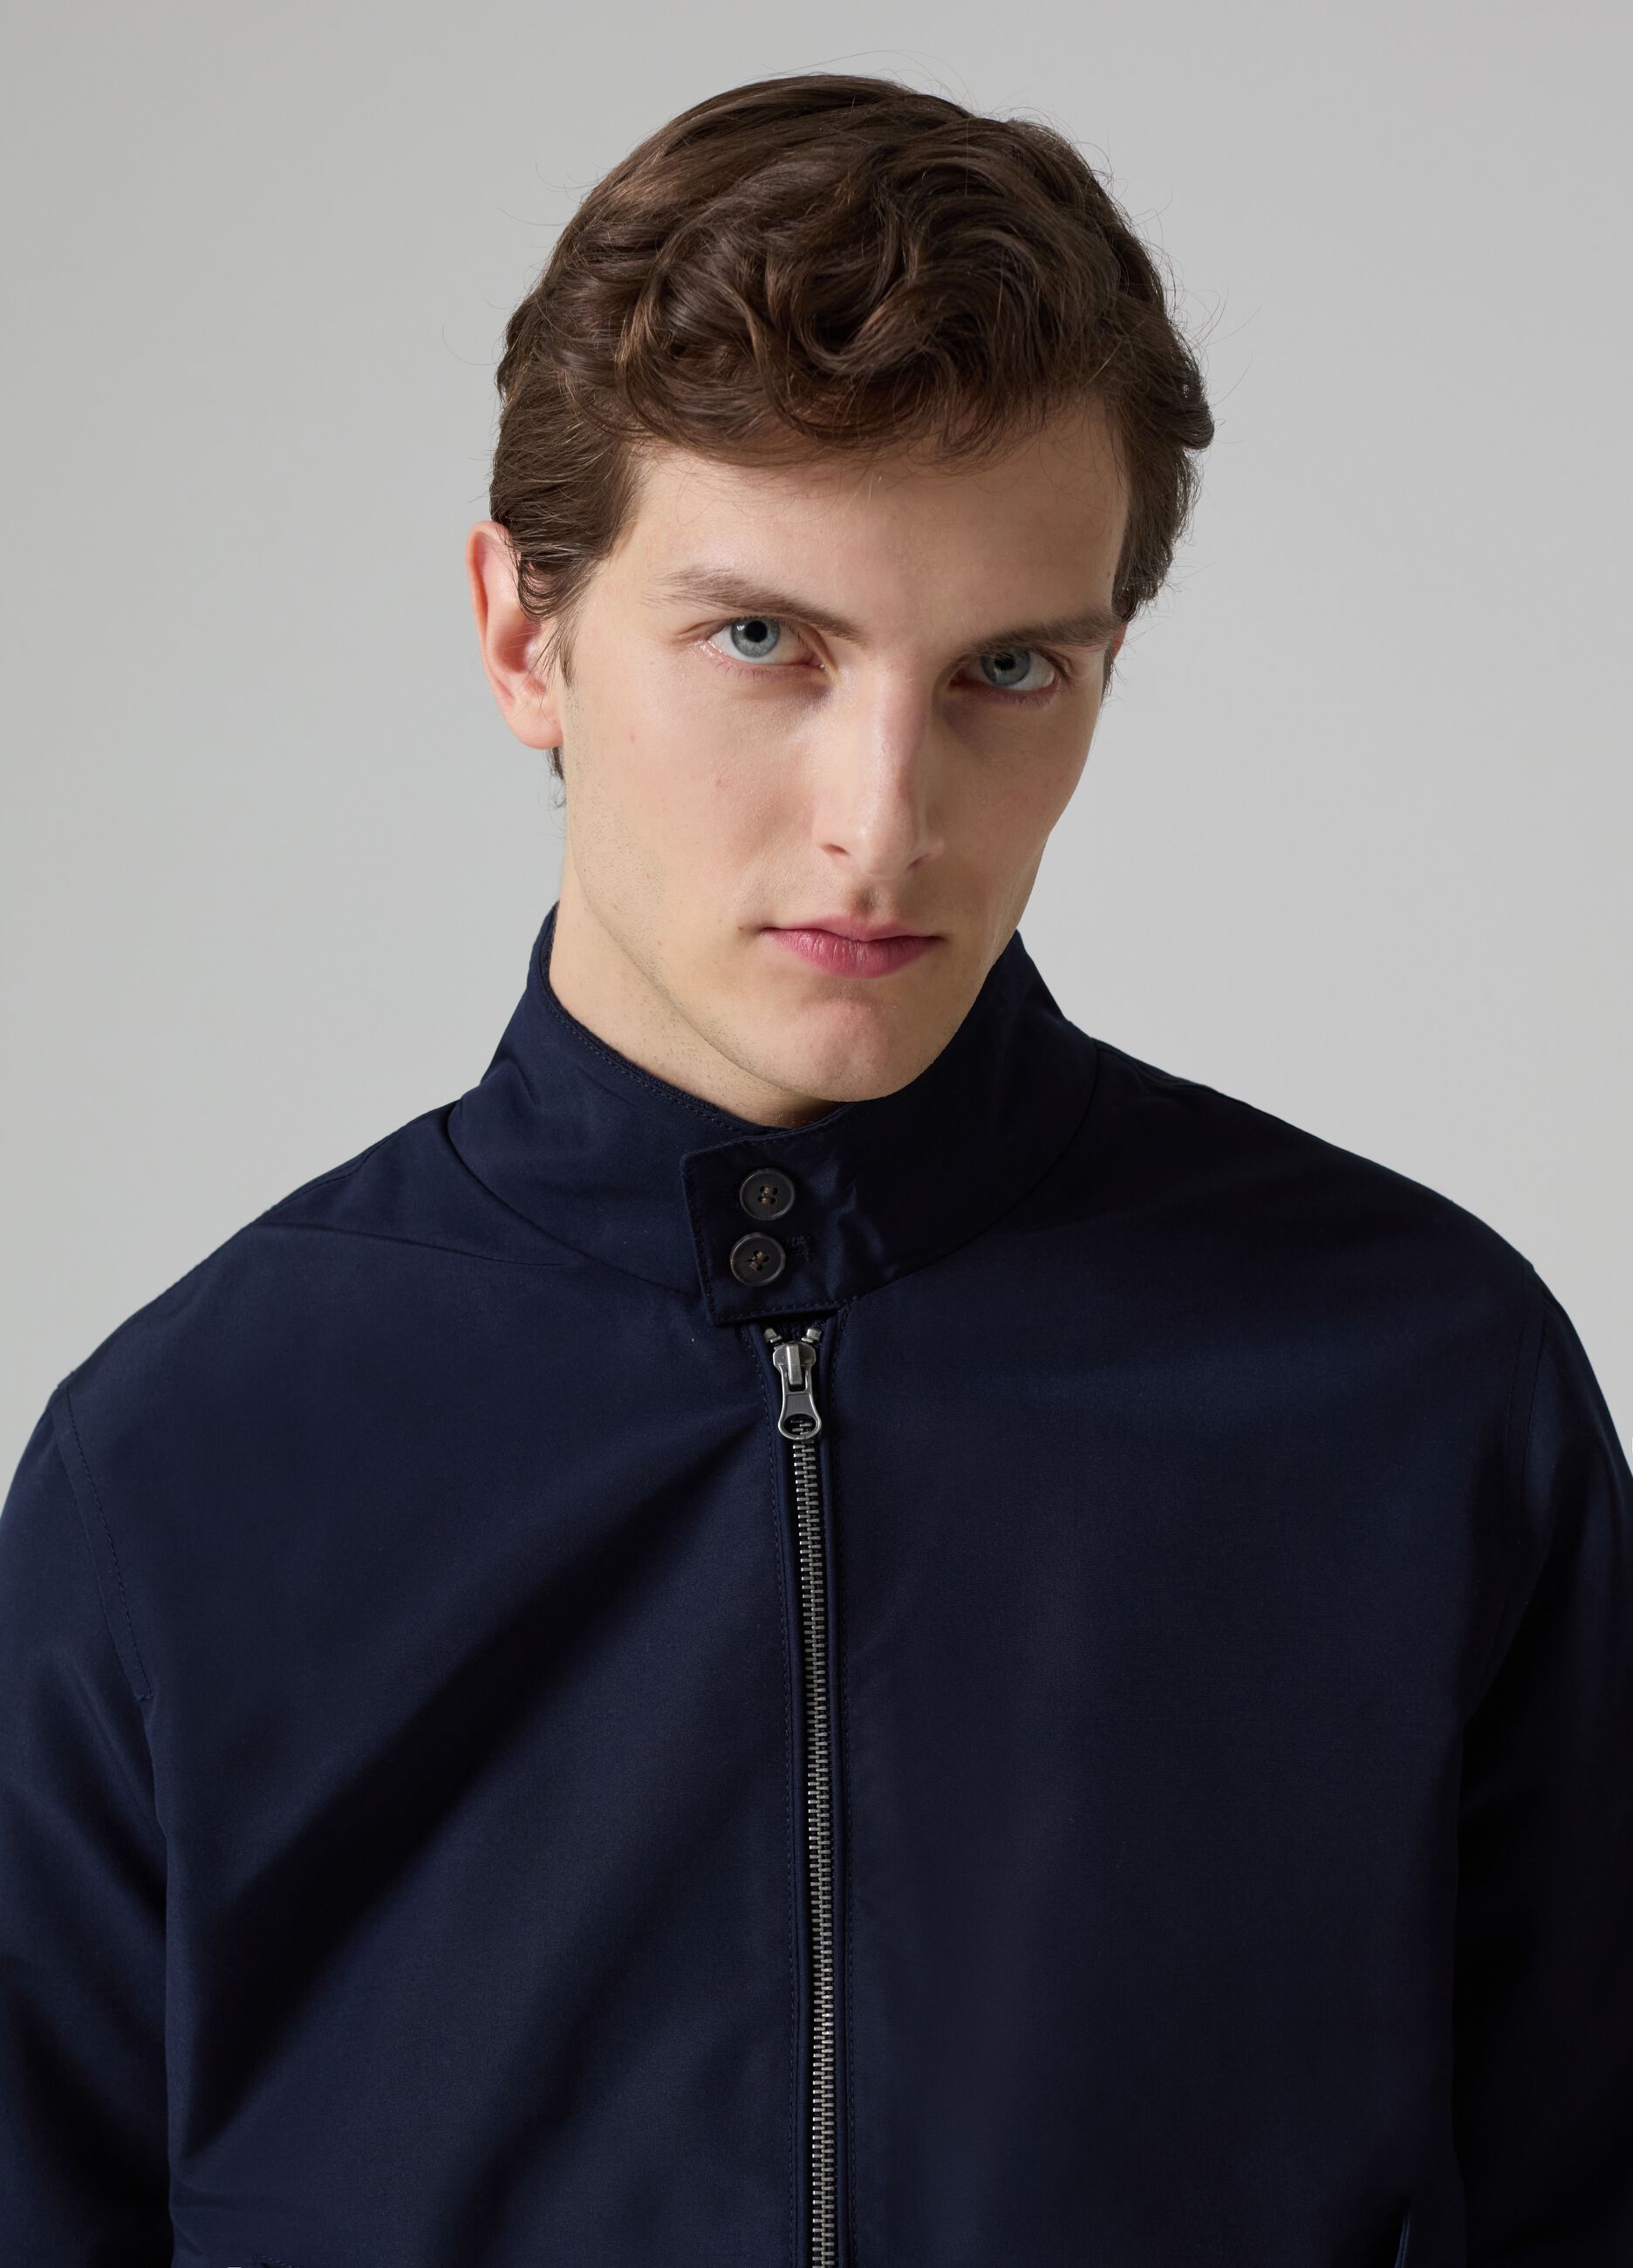 Full-zip bomber jacket with high neck and buttons